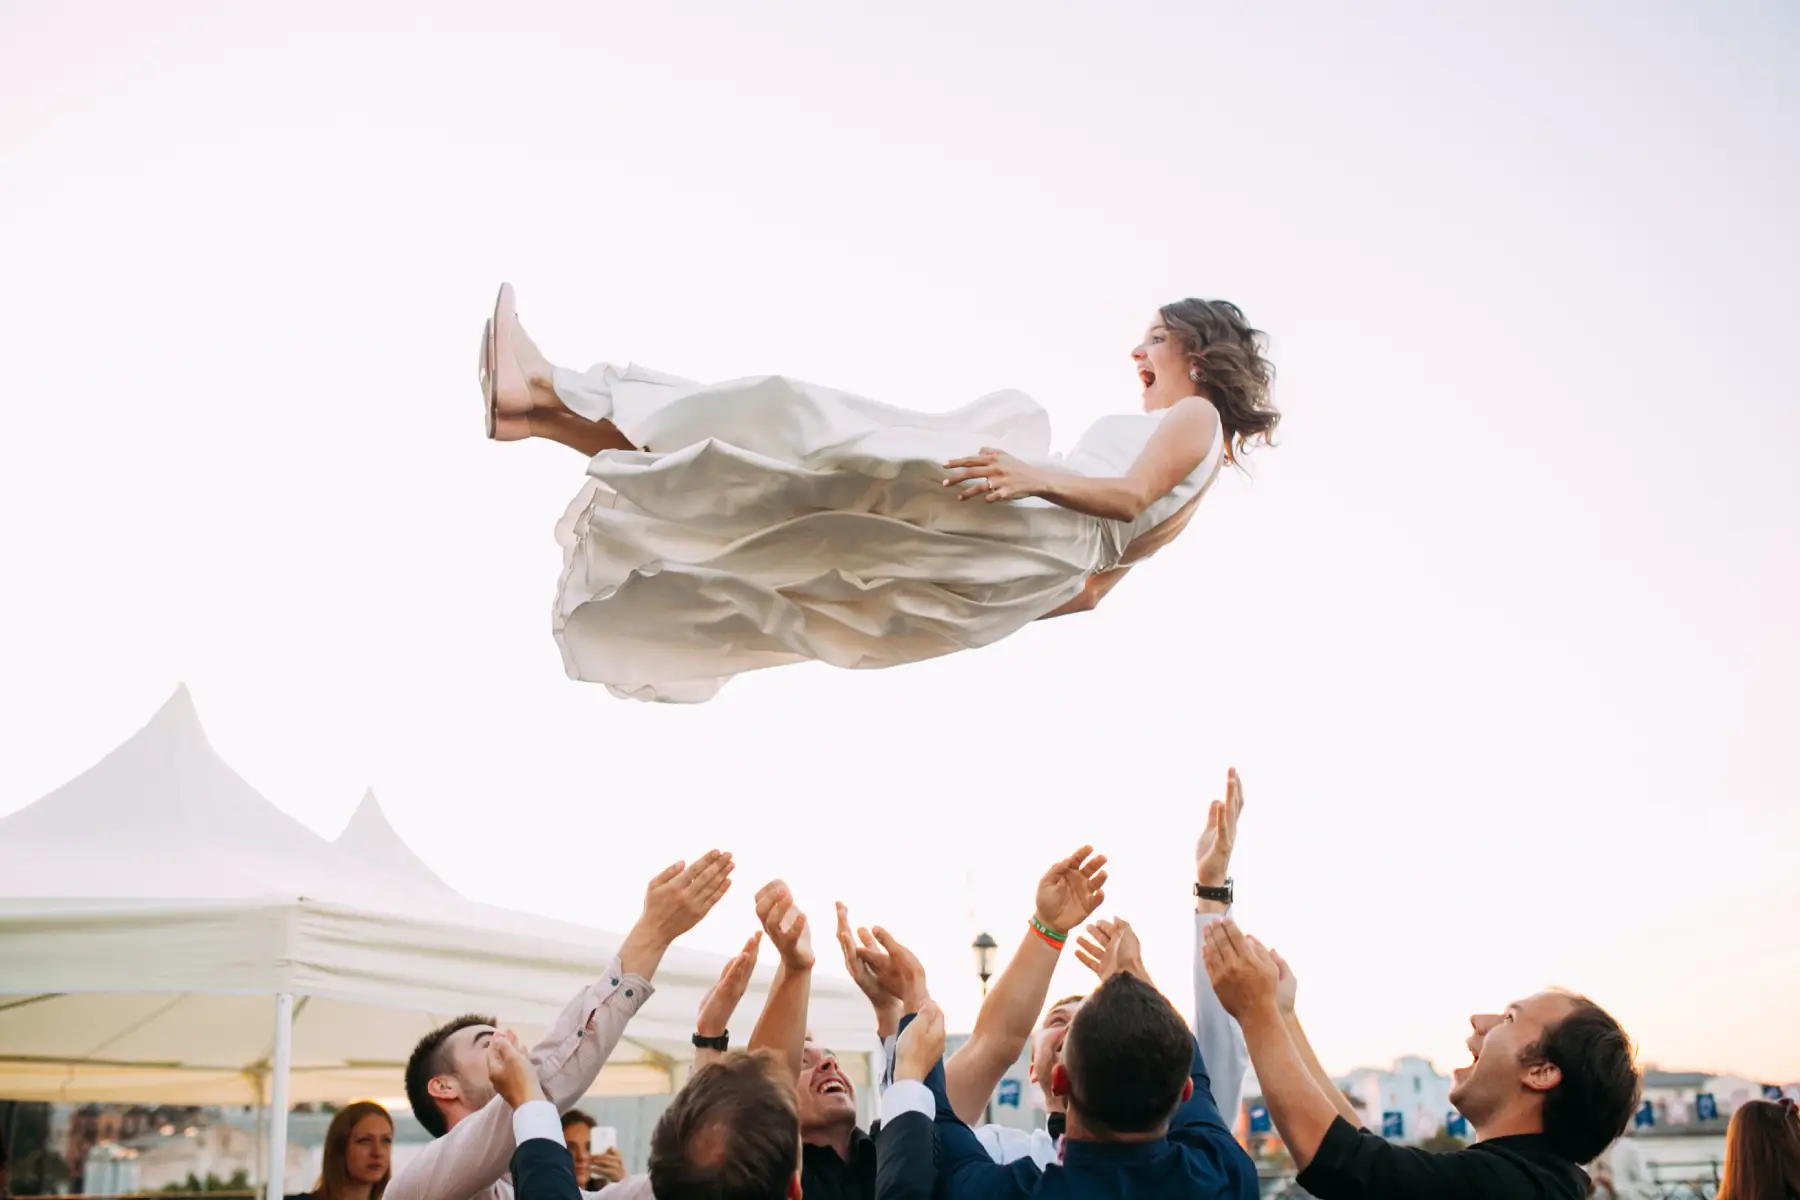 Bride thrown in air at ceremony, part of a tradition.